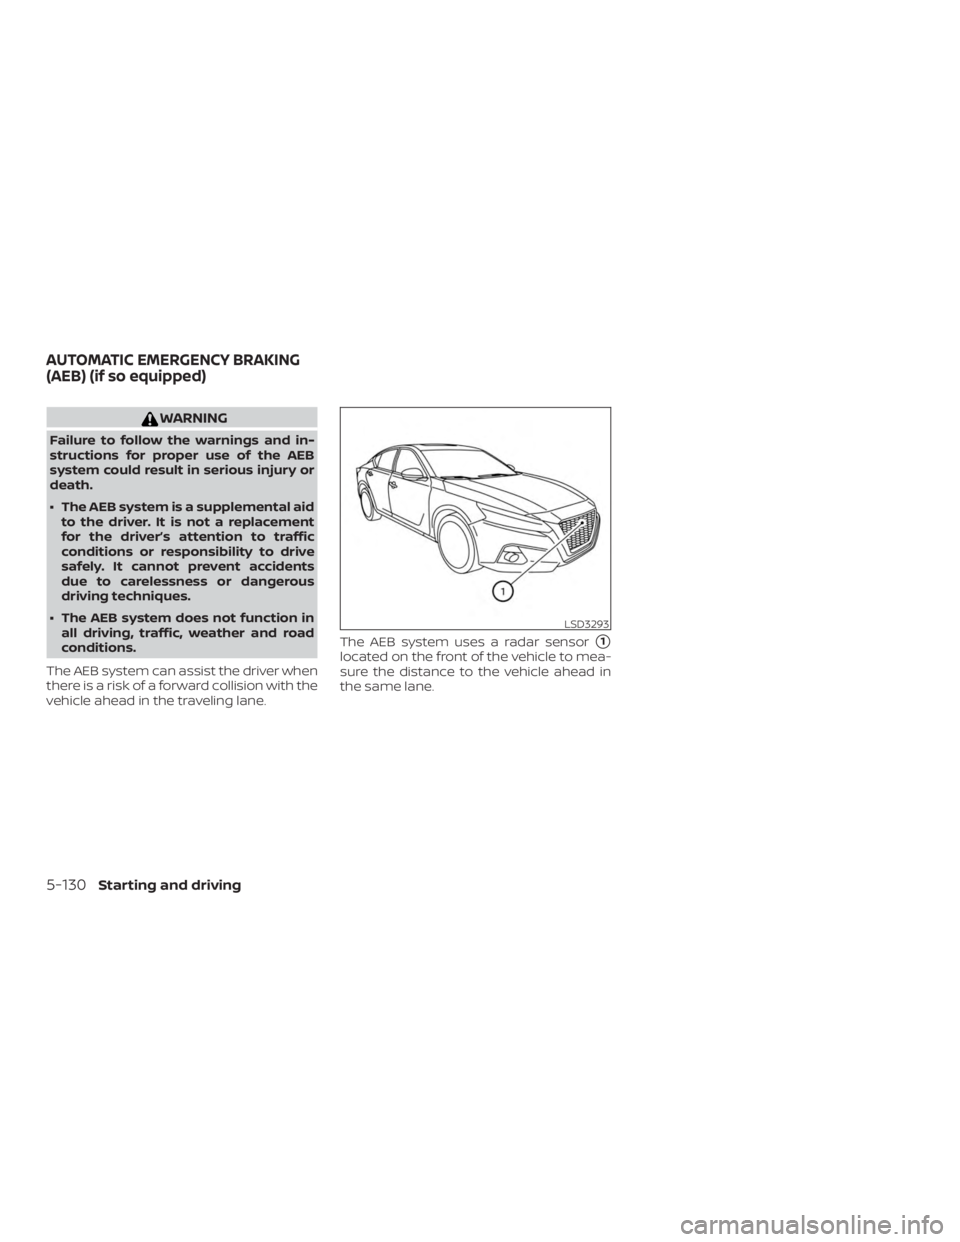 NISSAN ALTIMA 2022  Owners Manual WARNING
Failure to follow the warnings and in-
structions for proper use of the AEB
system could result in serious injury or
death.
∙ The AEB system is a supplemental aidto the driver. It is not a r